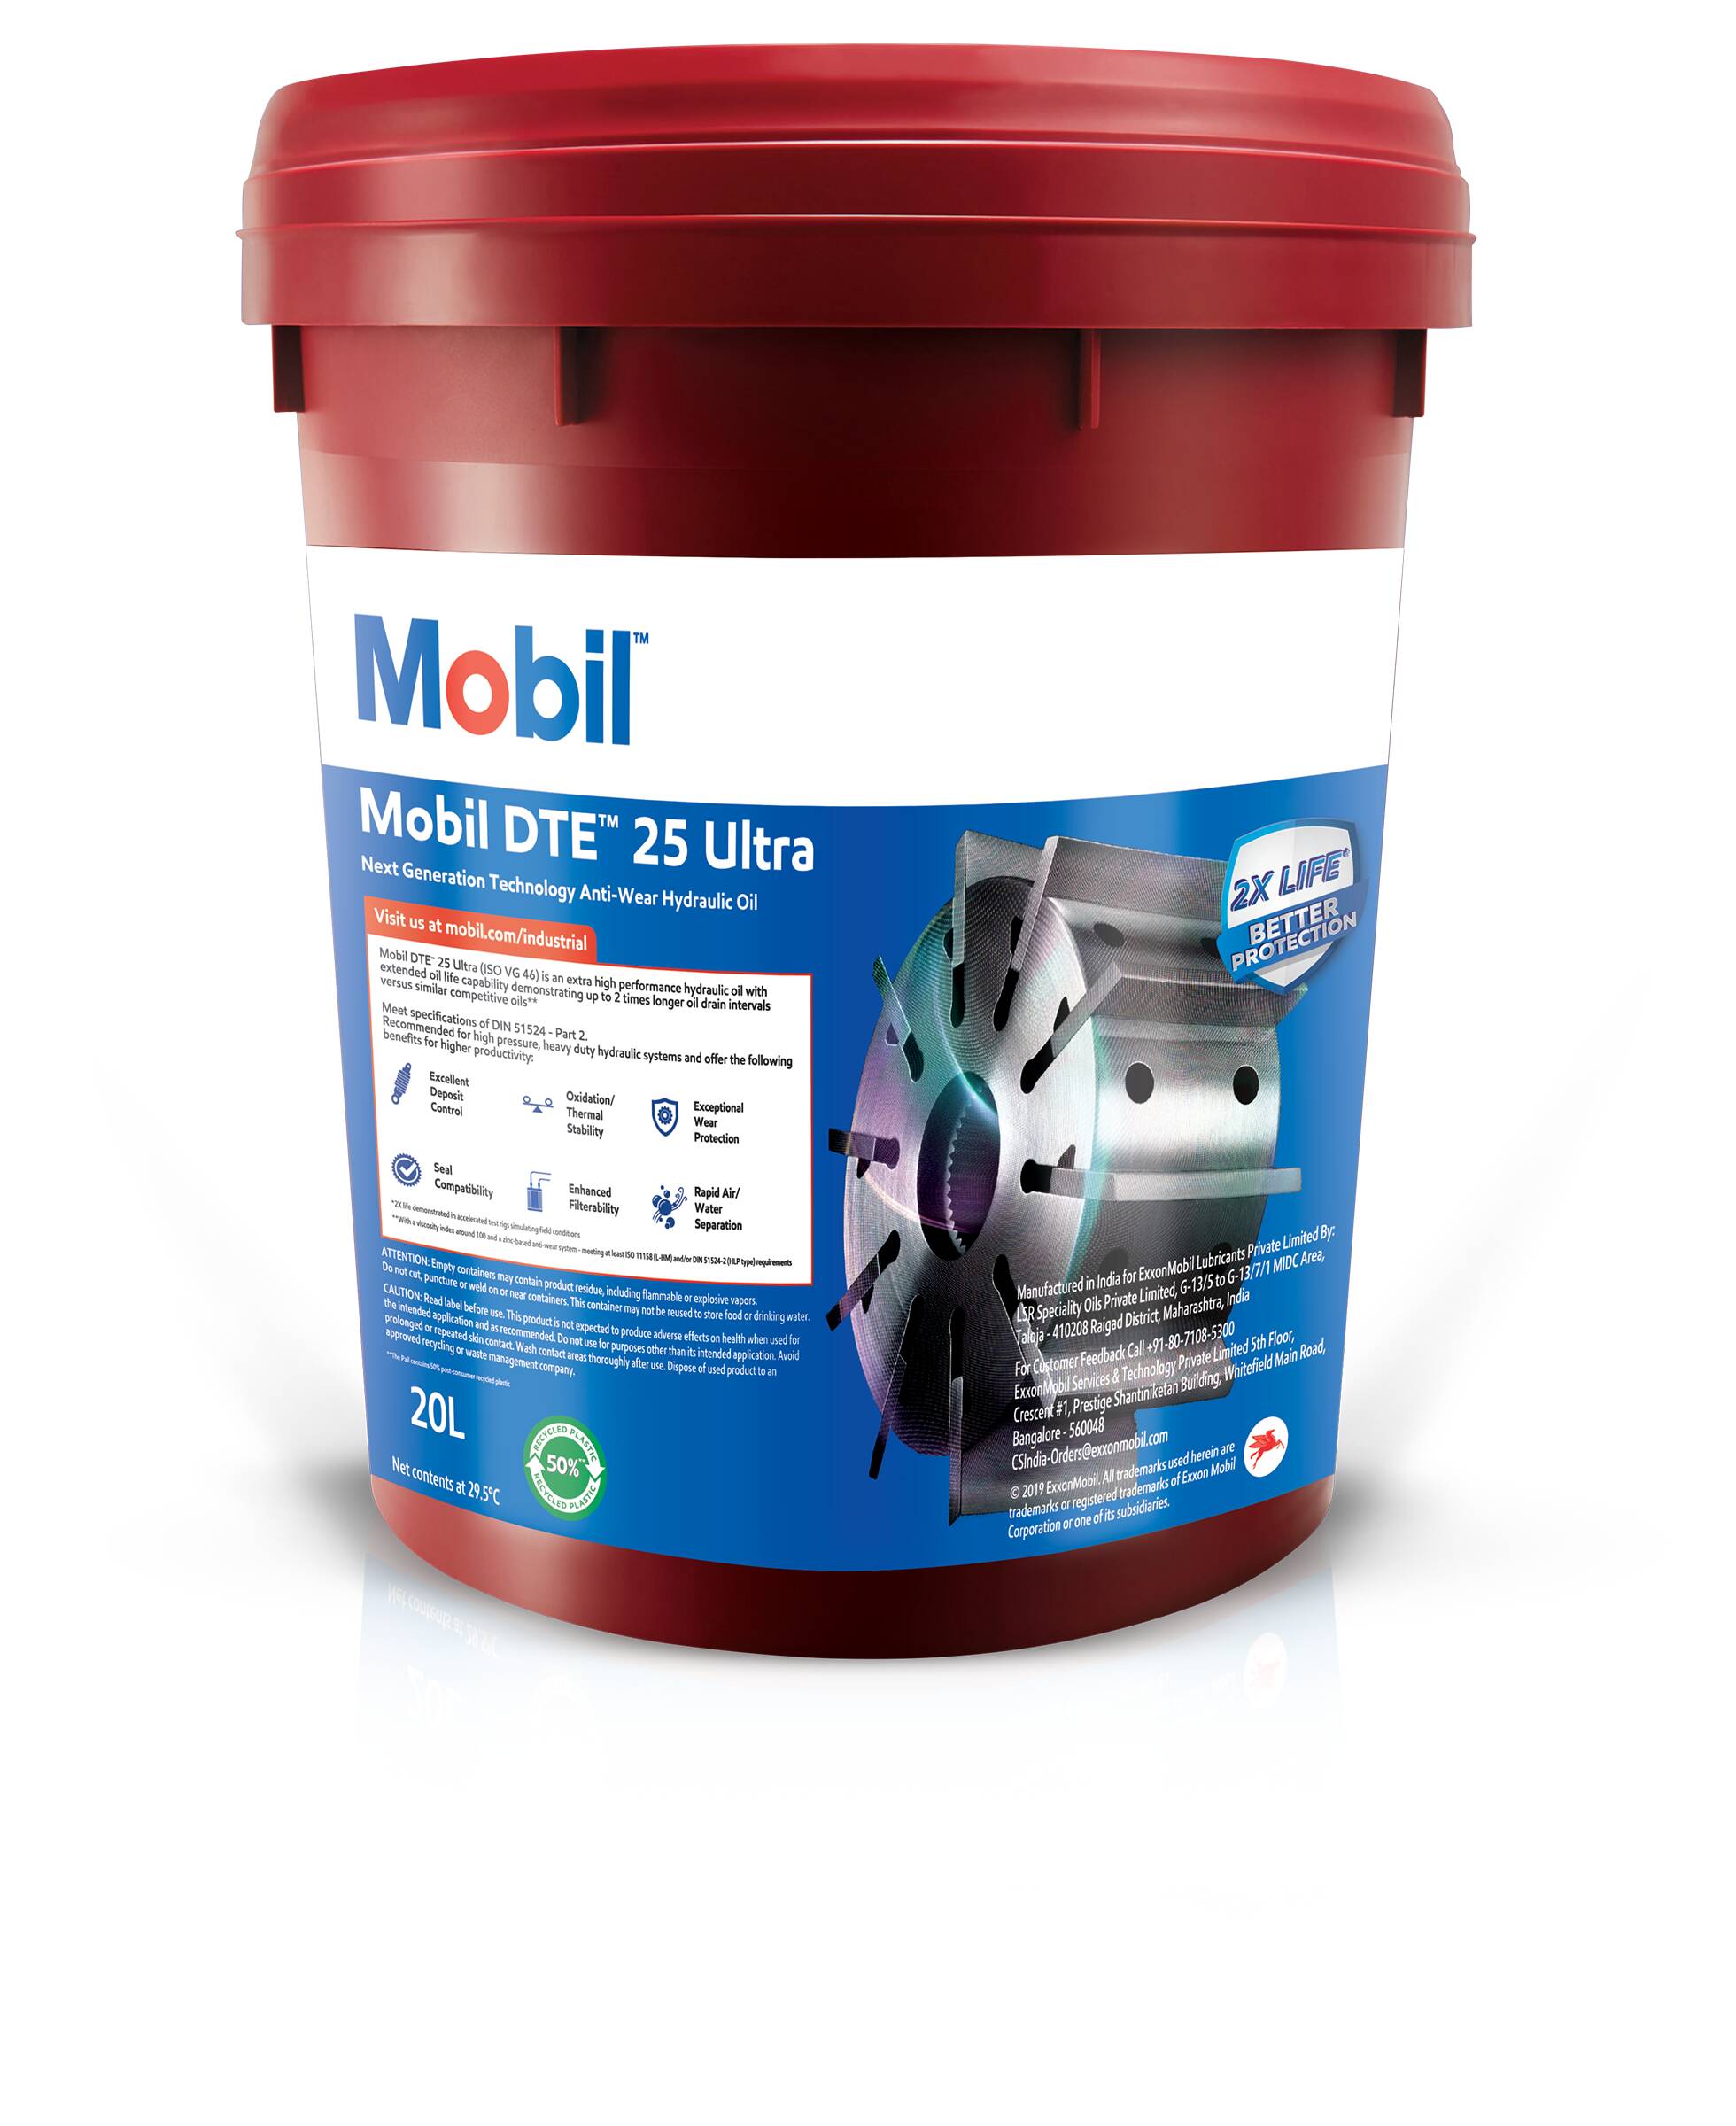 Image Our new 20-liter lubricant pails contain 50% post-consumer recycled content.